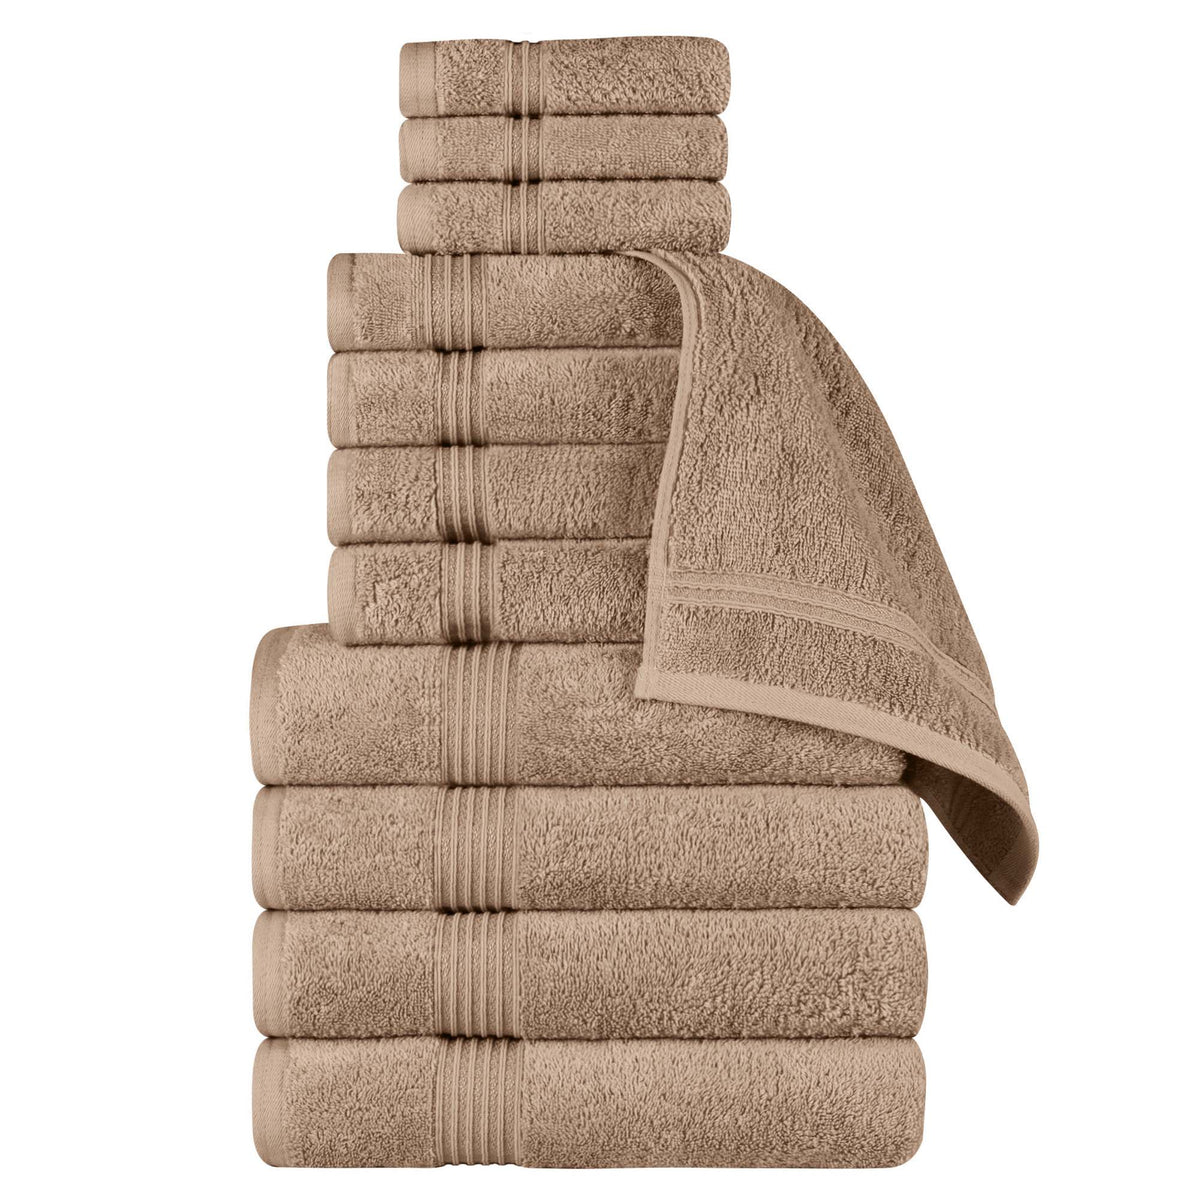 Egyptian Cotton Highly Absorbent Solid 12 Piece Ultra Soft Towel Set - Taupe